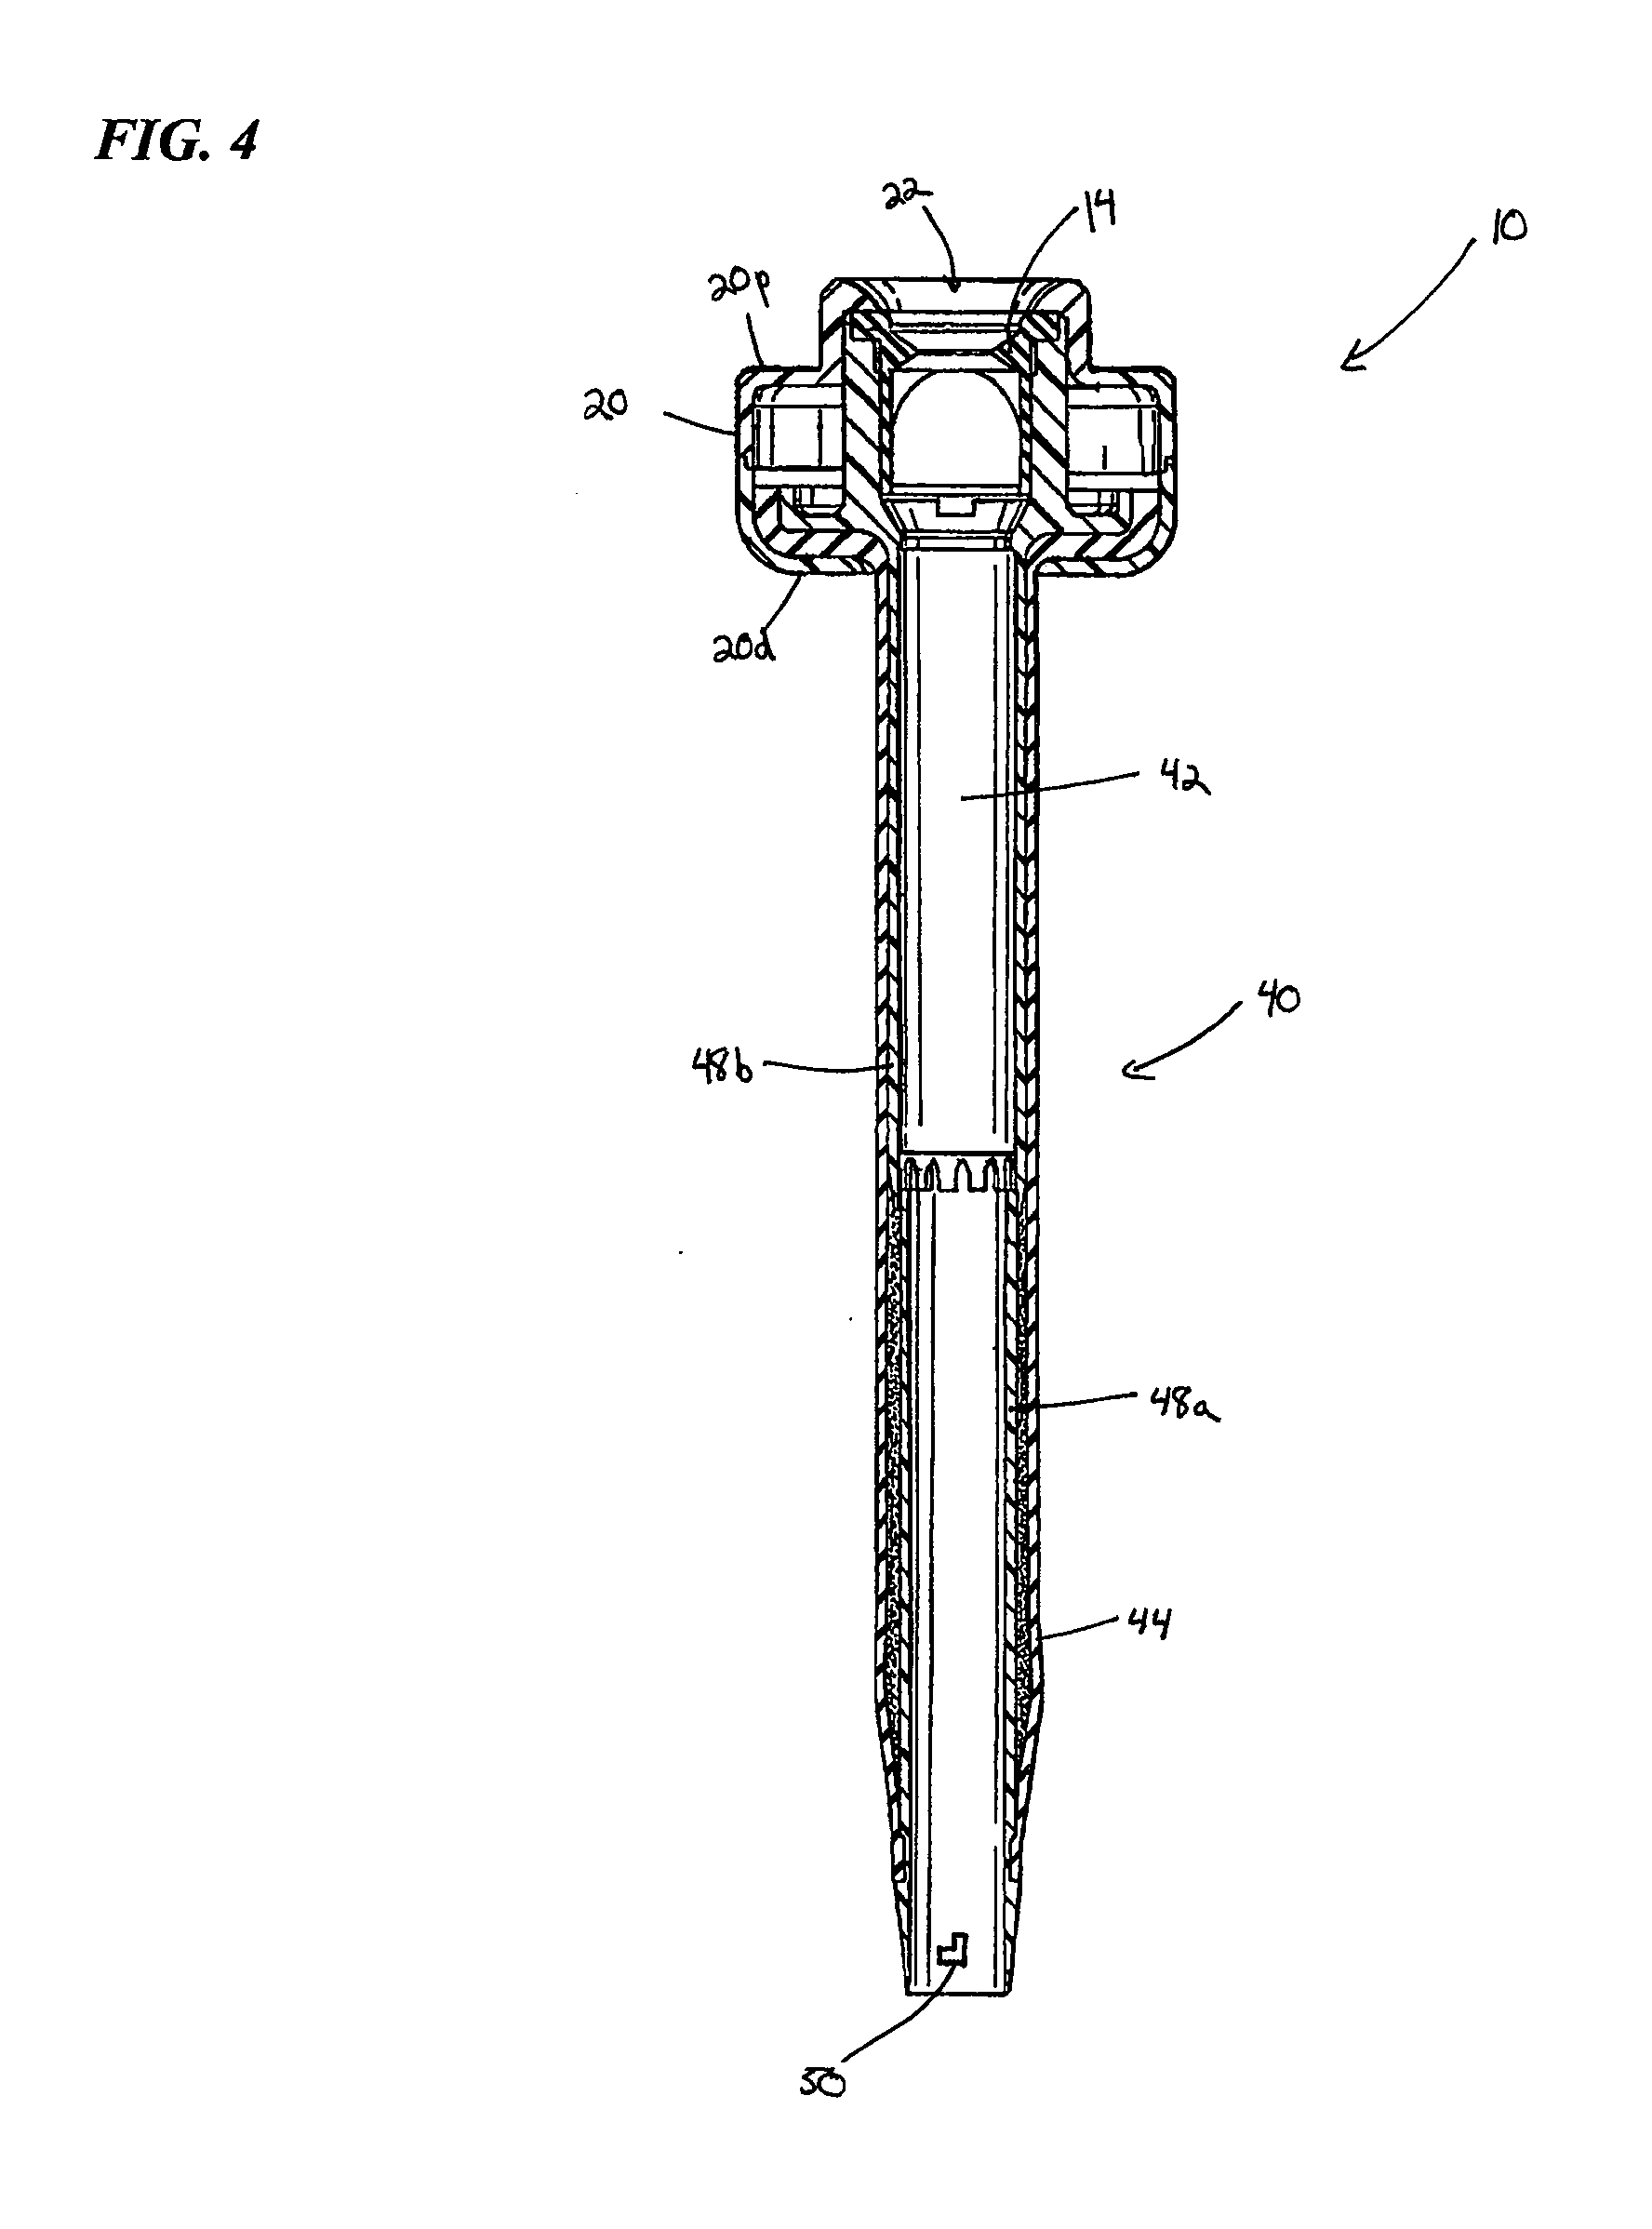 Methods and devices for accessing a body cavity